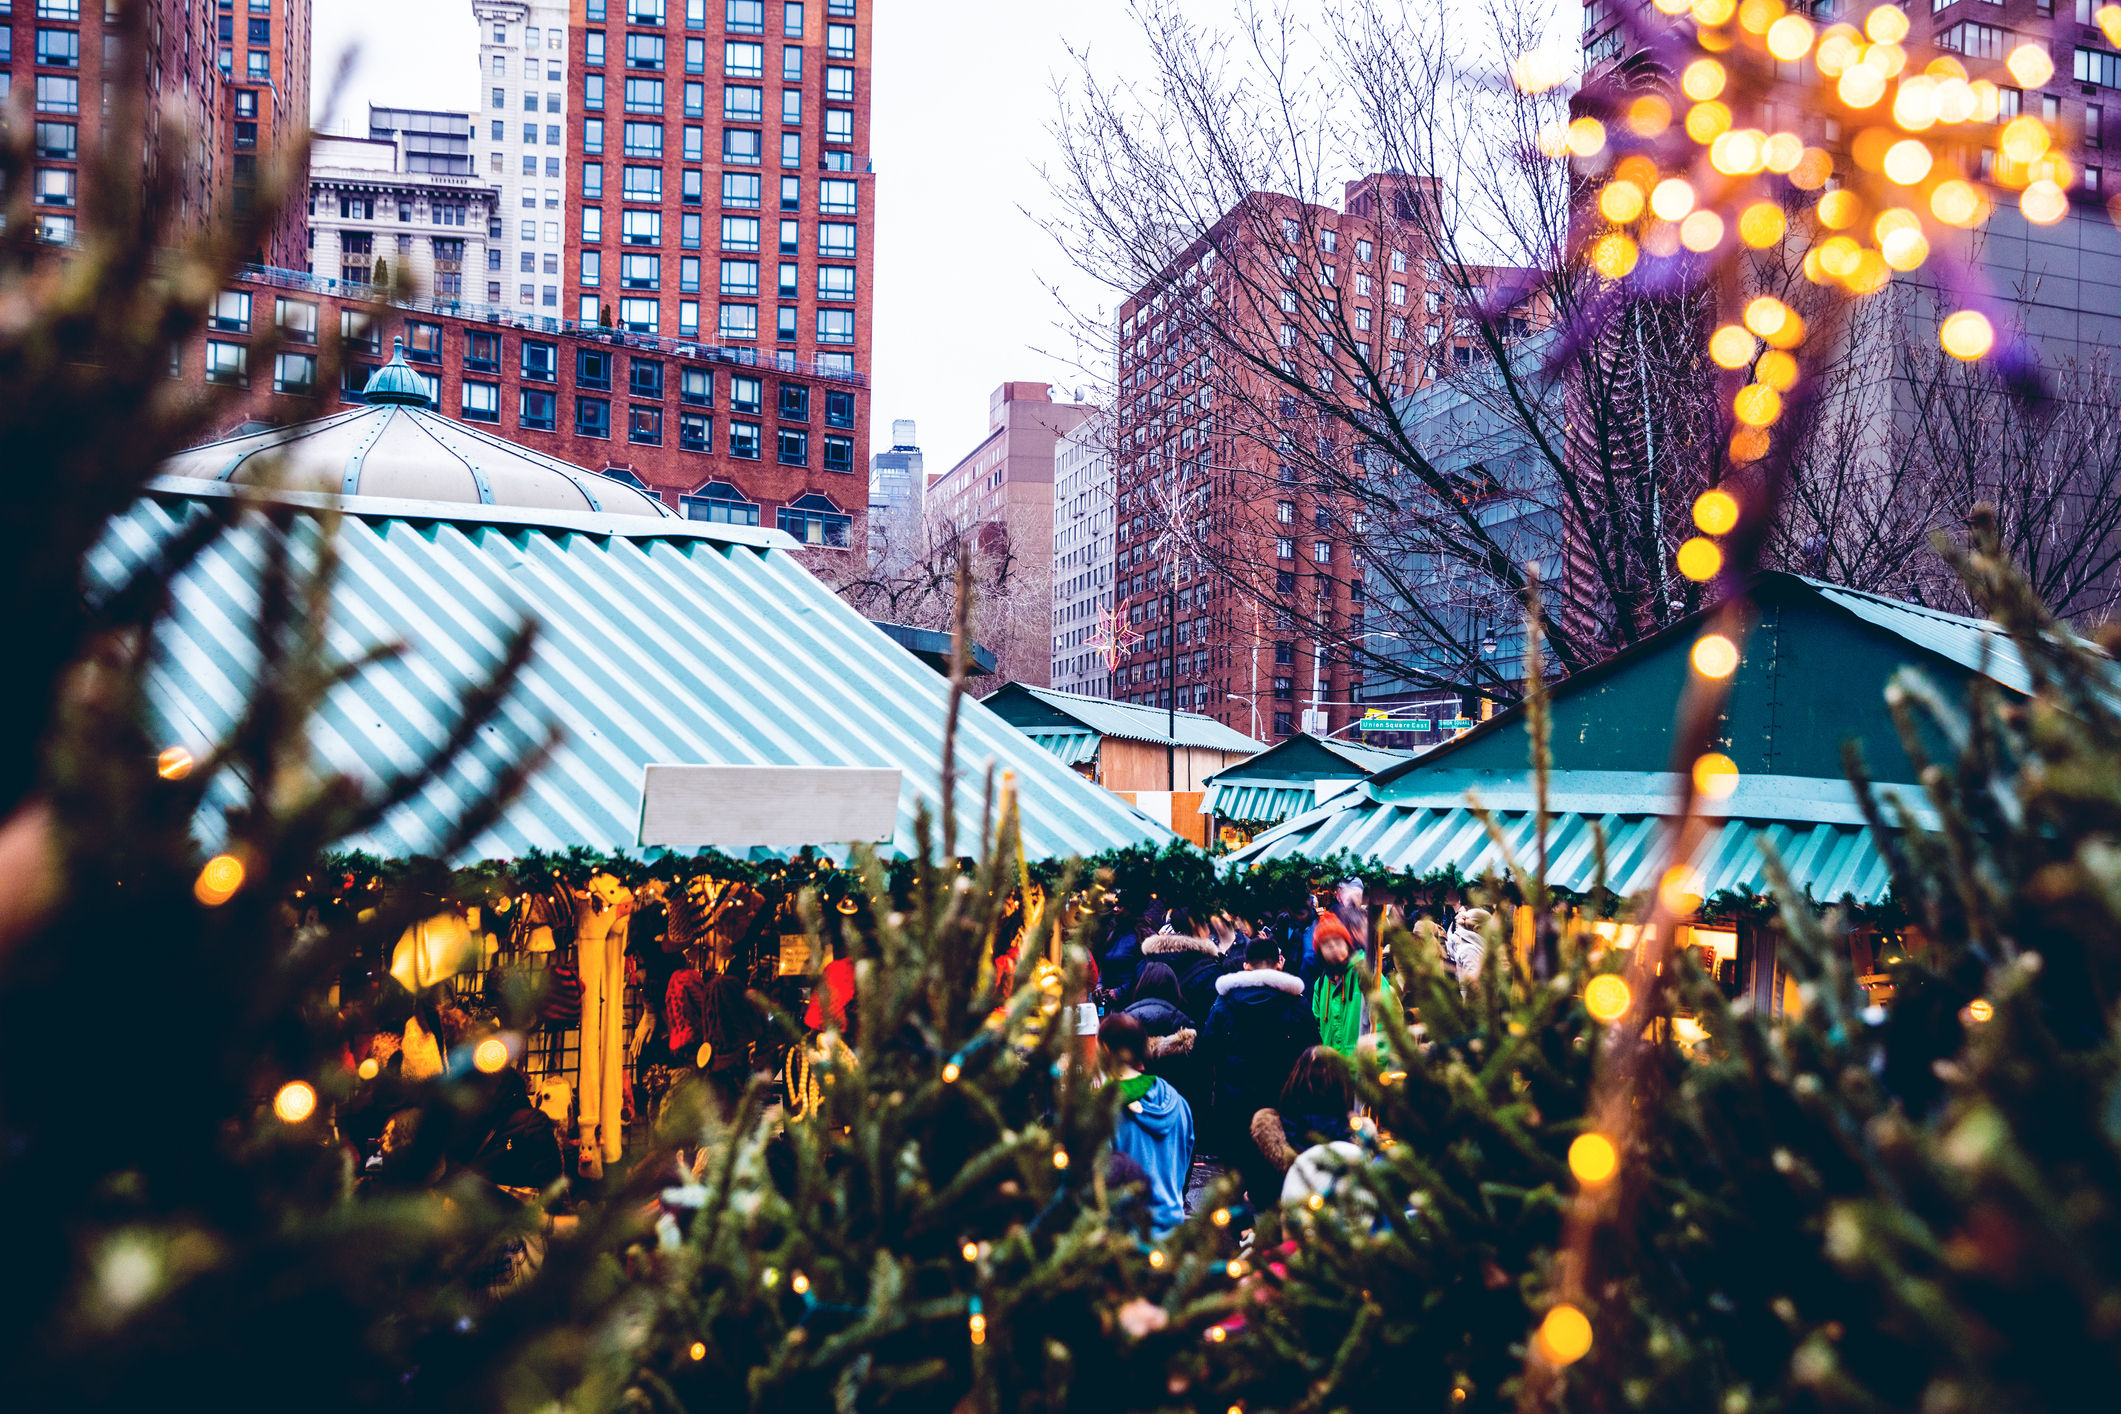 A Christmas Market in New York City